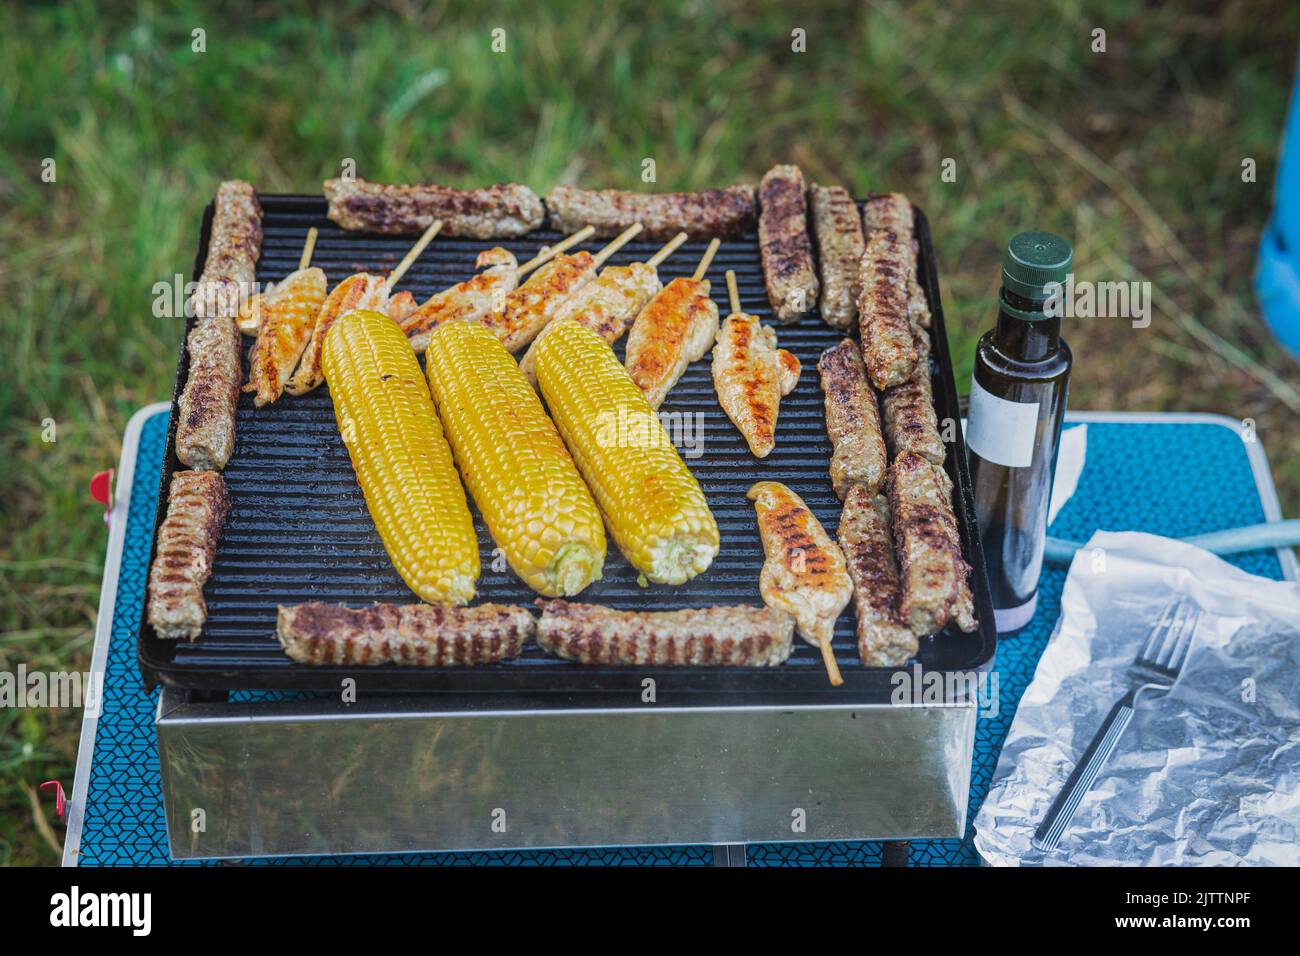 Delicious assortiment of meat and corn on a small gas cooker at a picnic outdoors. Tasty food being prepared on a table top grill. Stock Photo